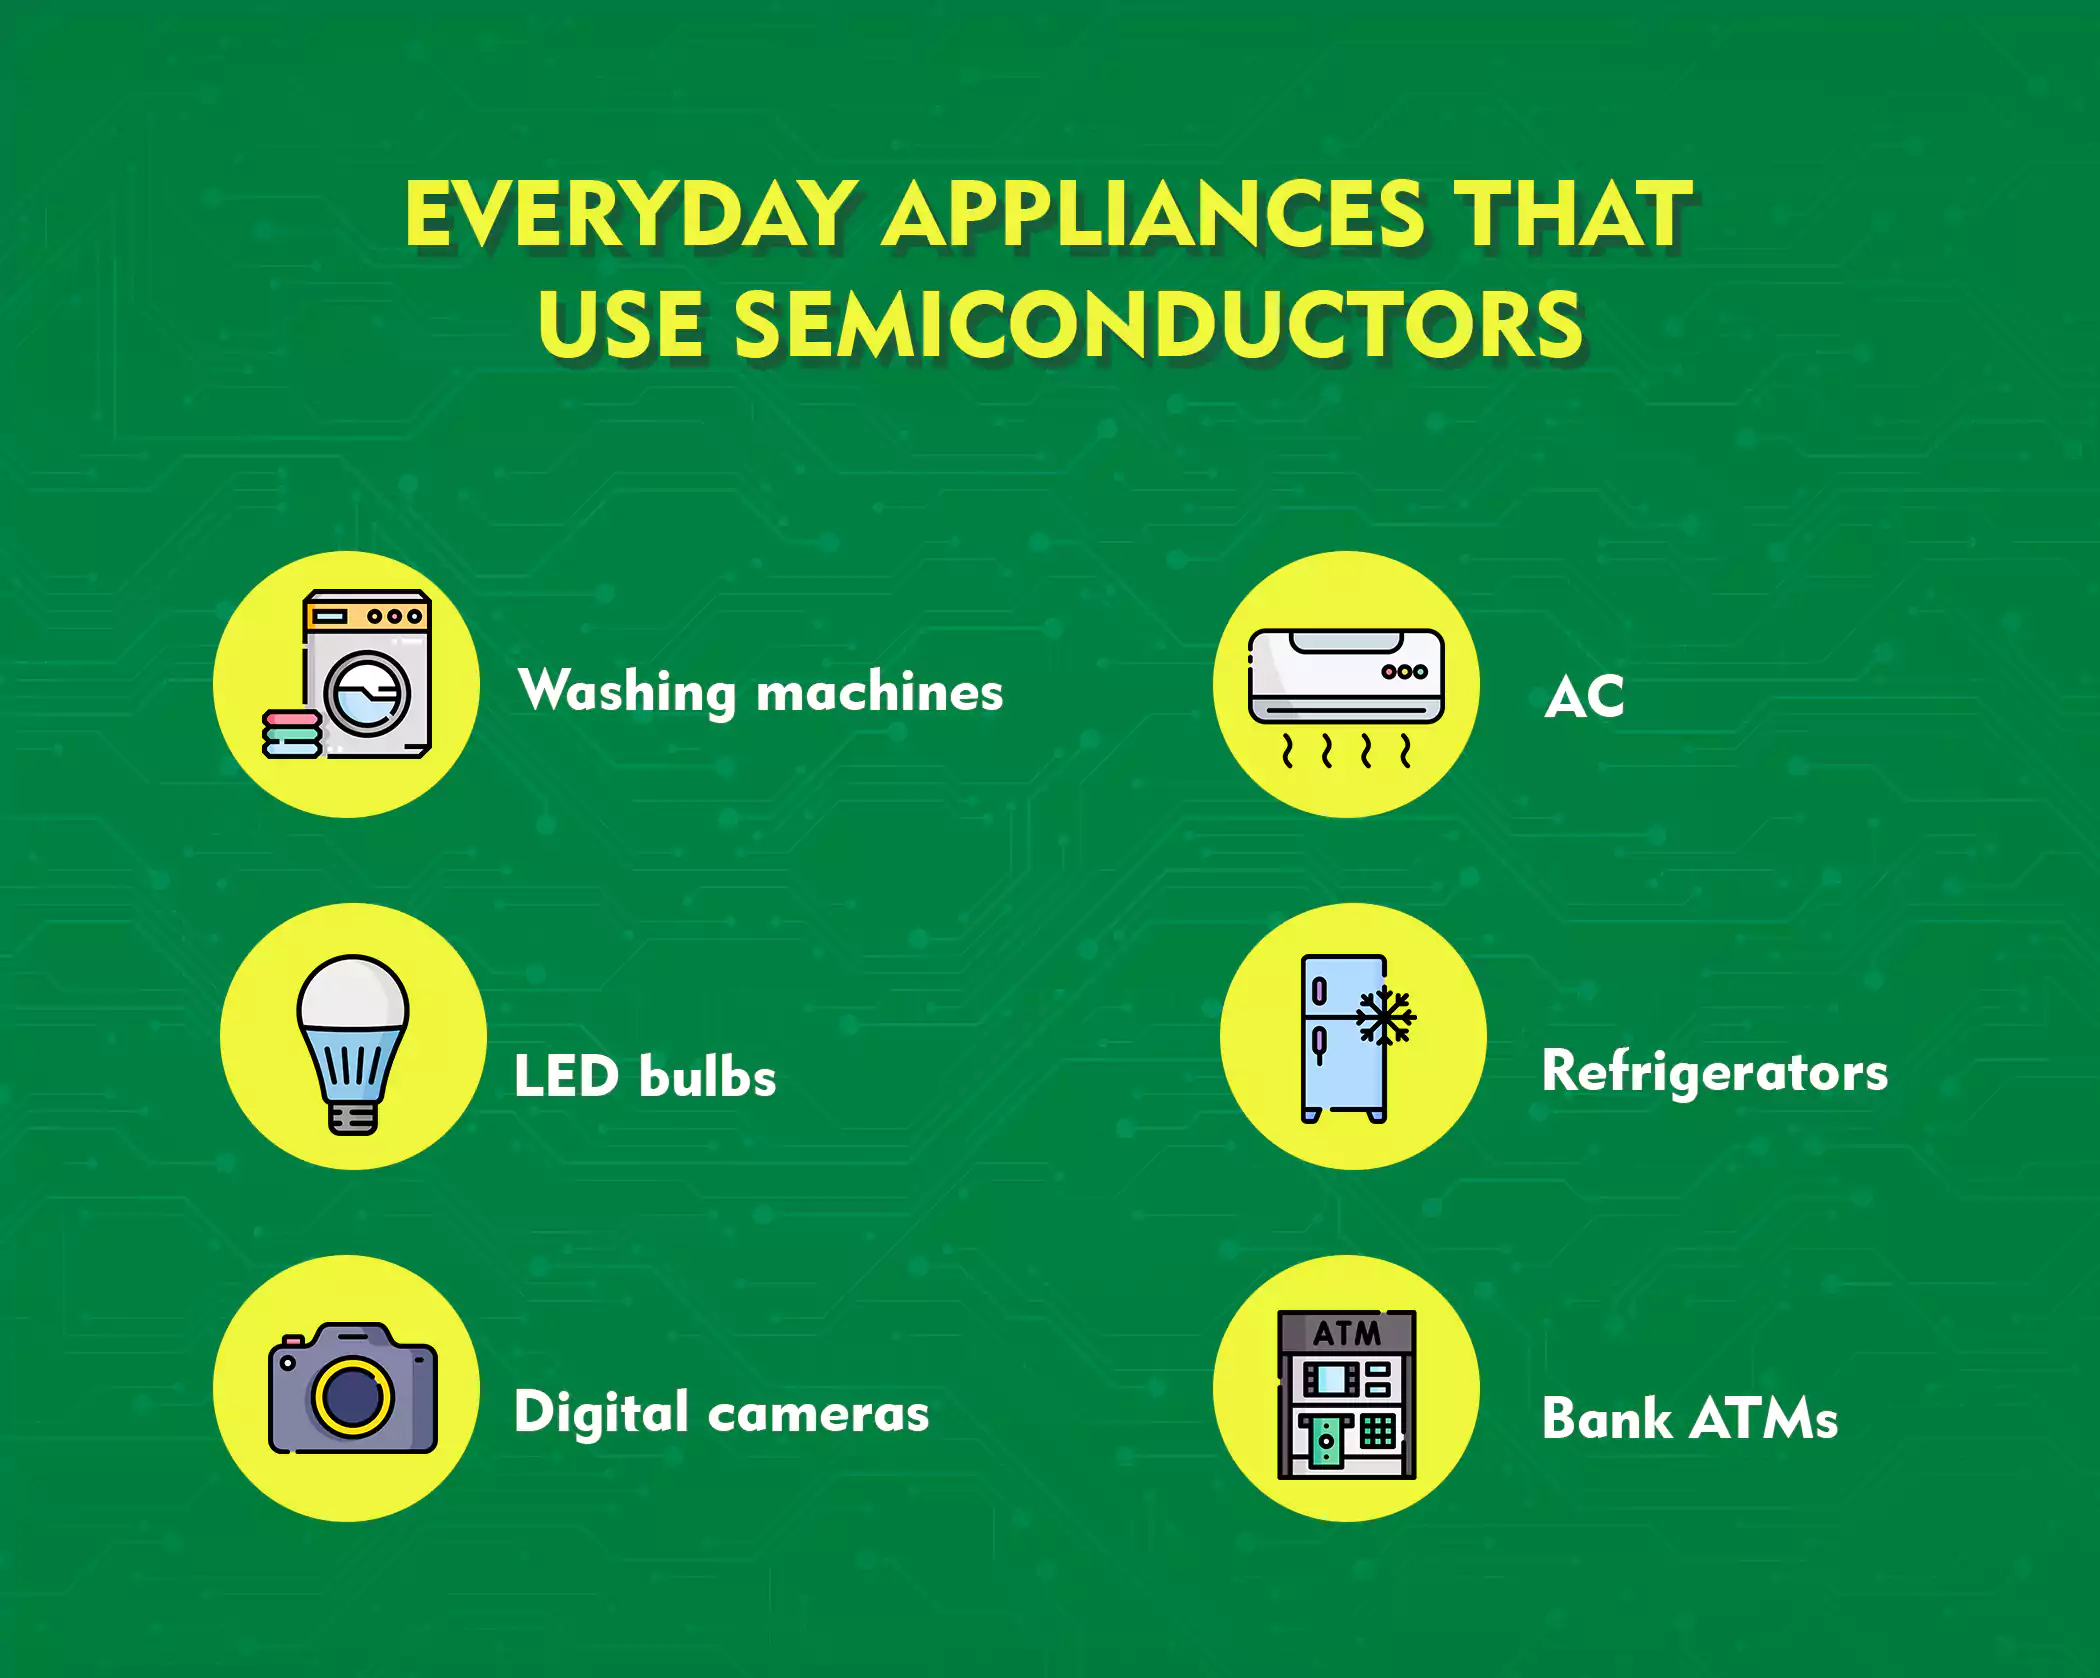 Everyday appliances that use semiconductors